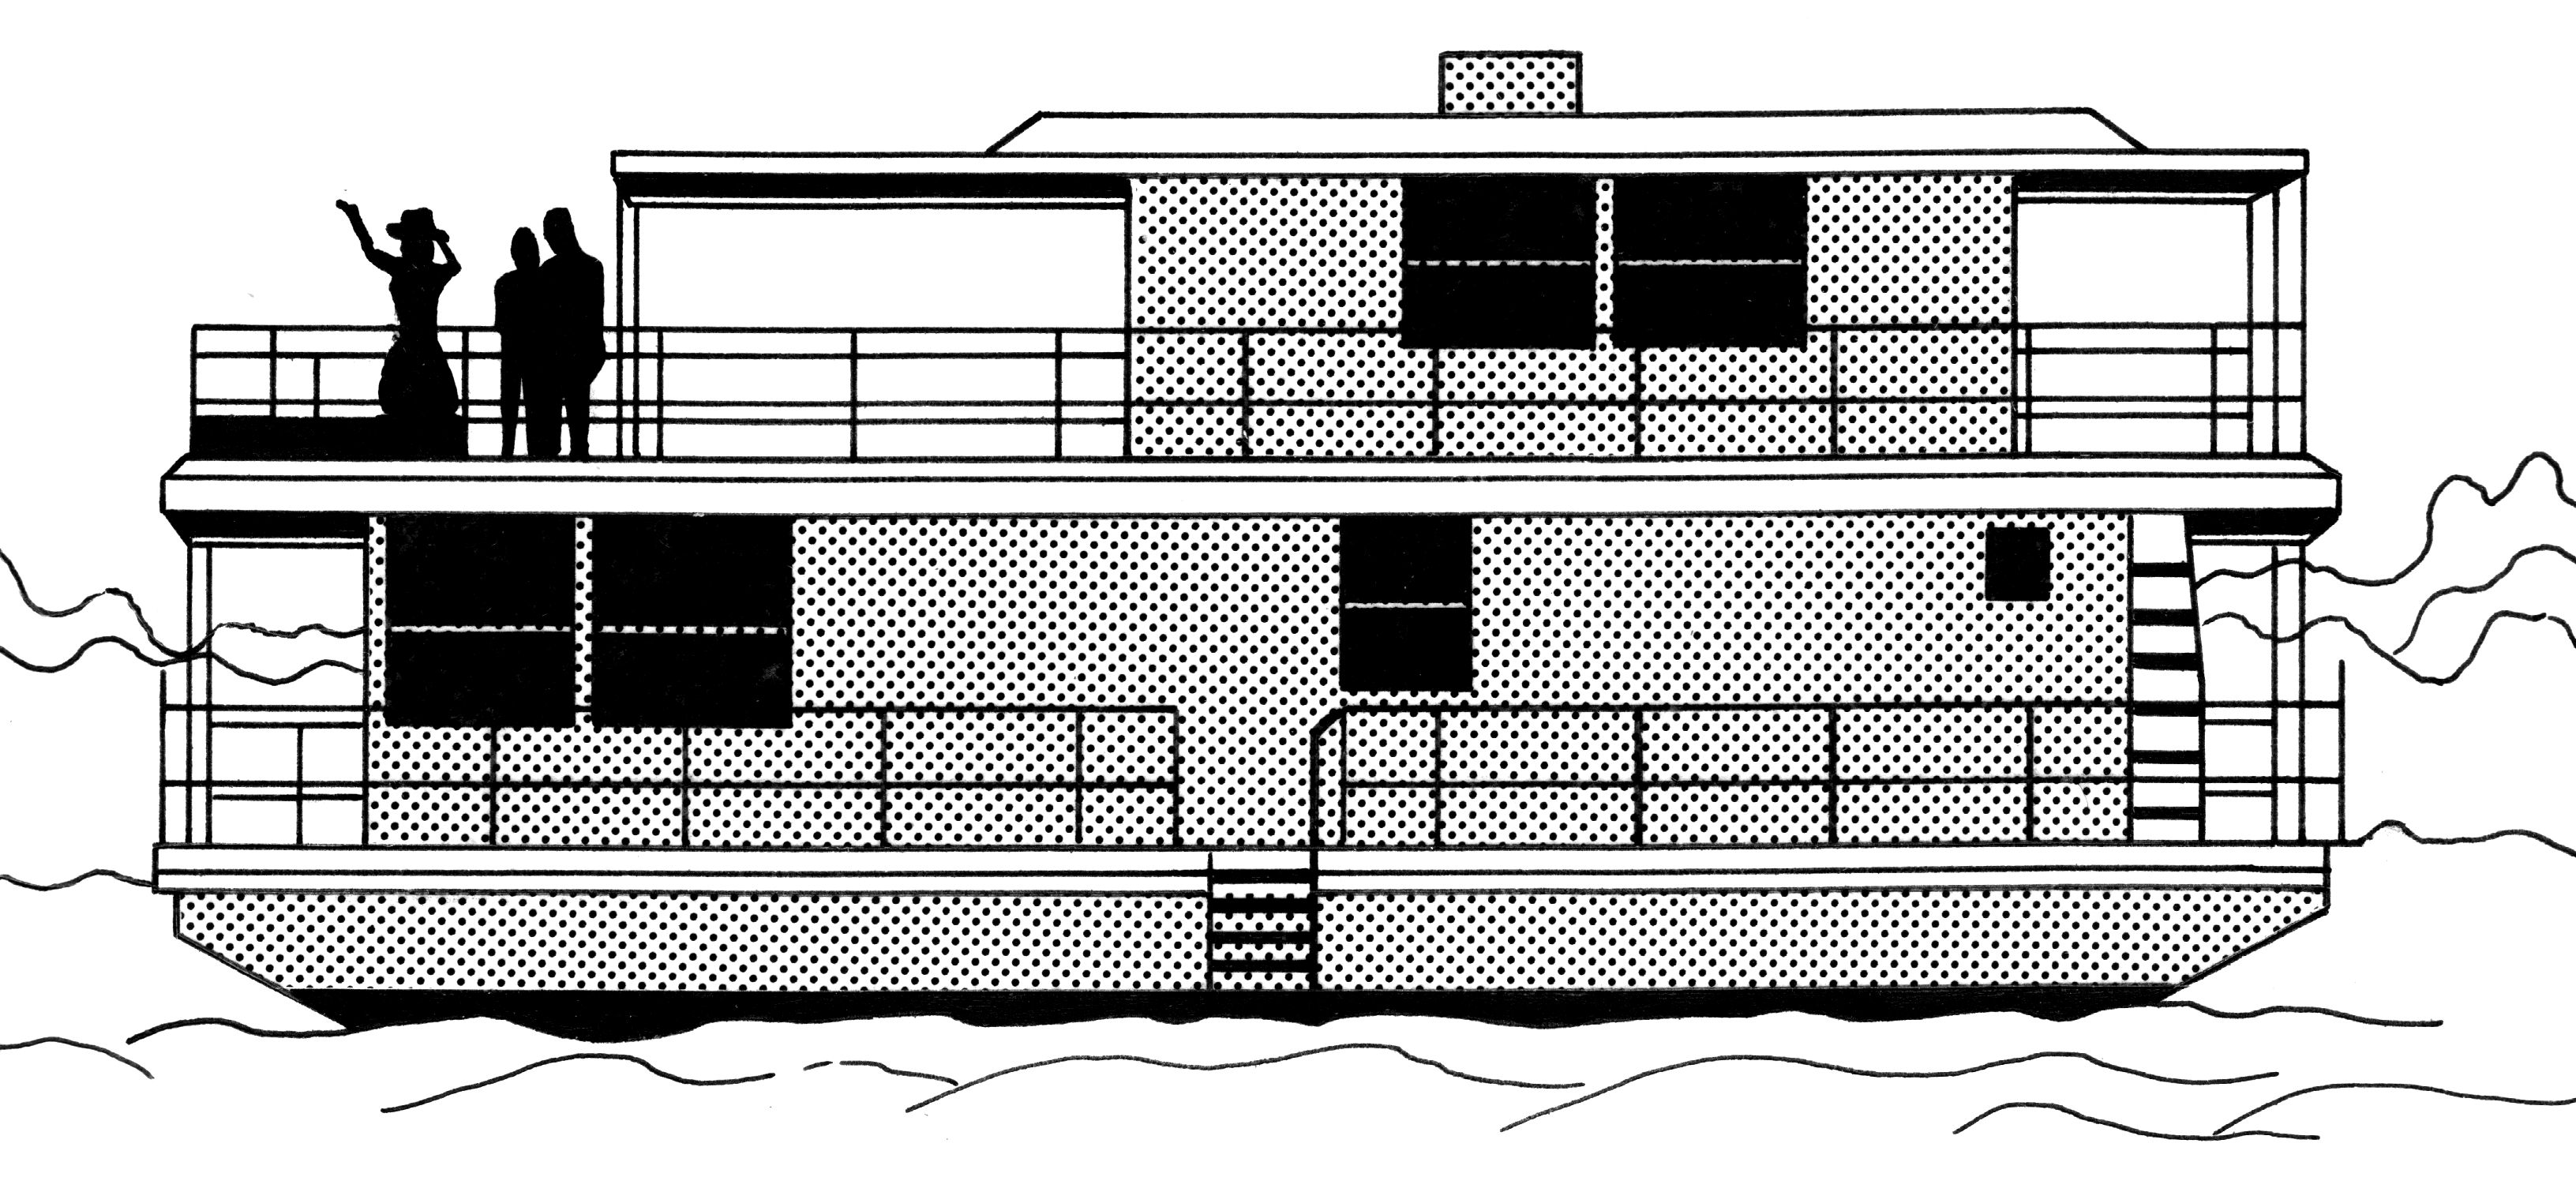 File:Houseboat (PSF).png